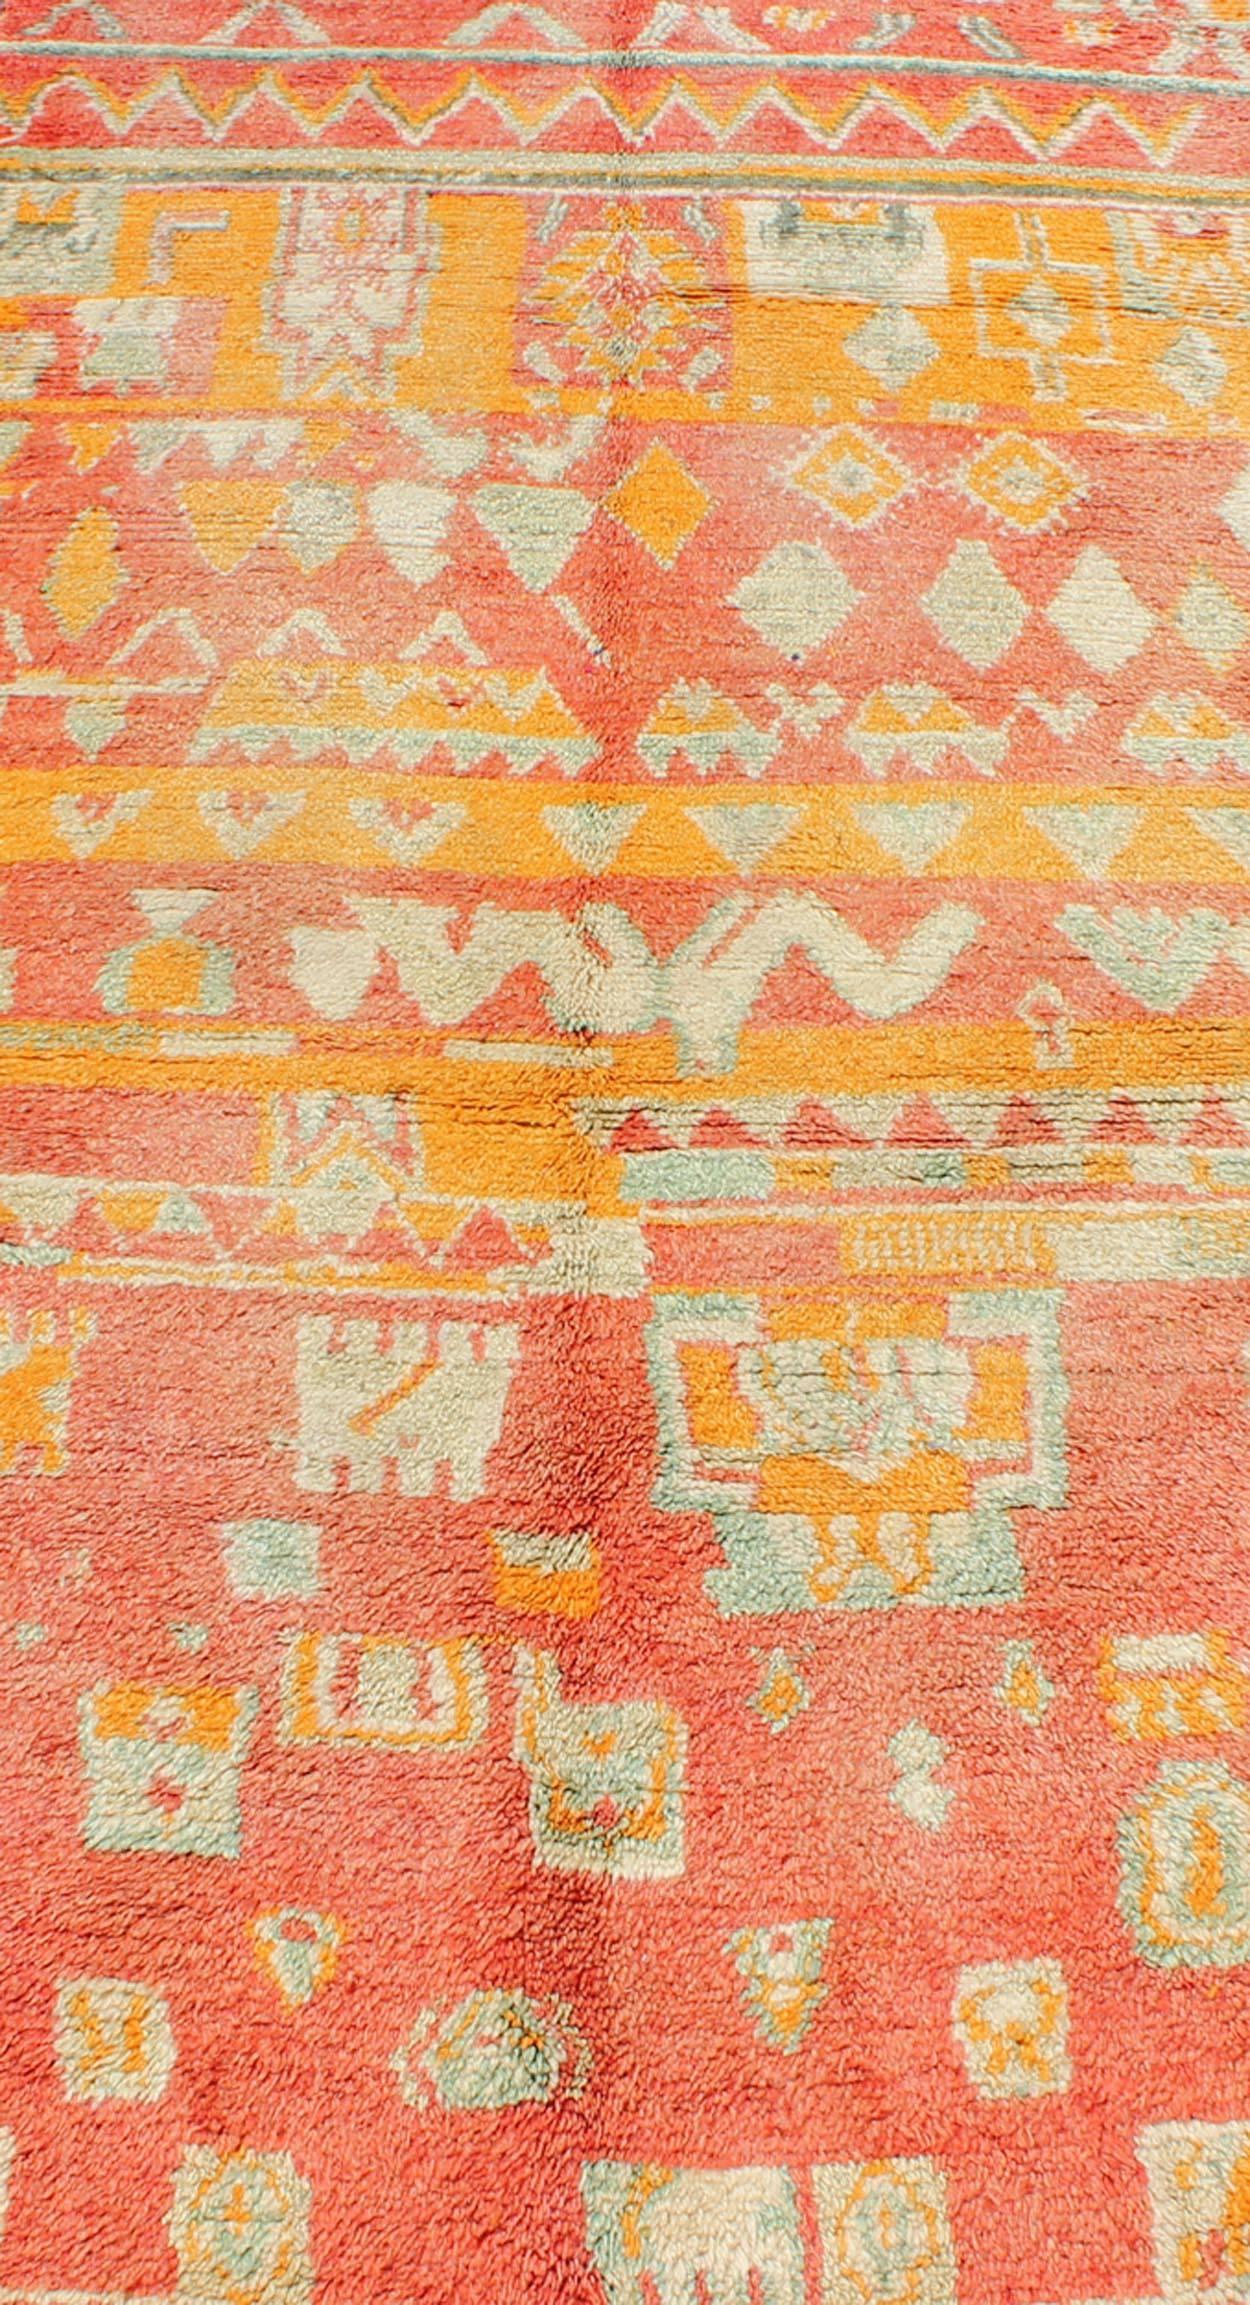 Tribal Design Vintage Moroccan Rug in Orange, Red, Mint Green and Ivory For Sale 4